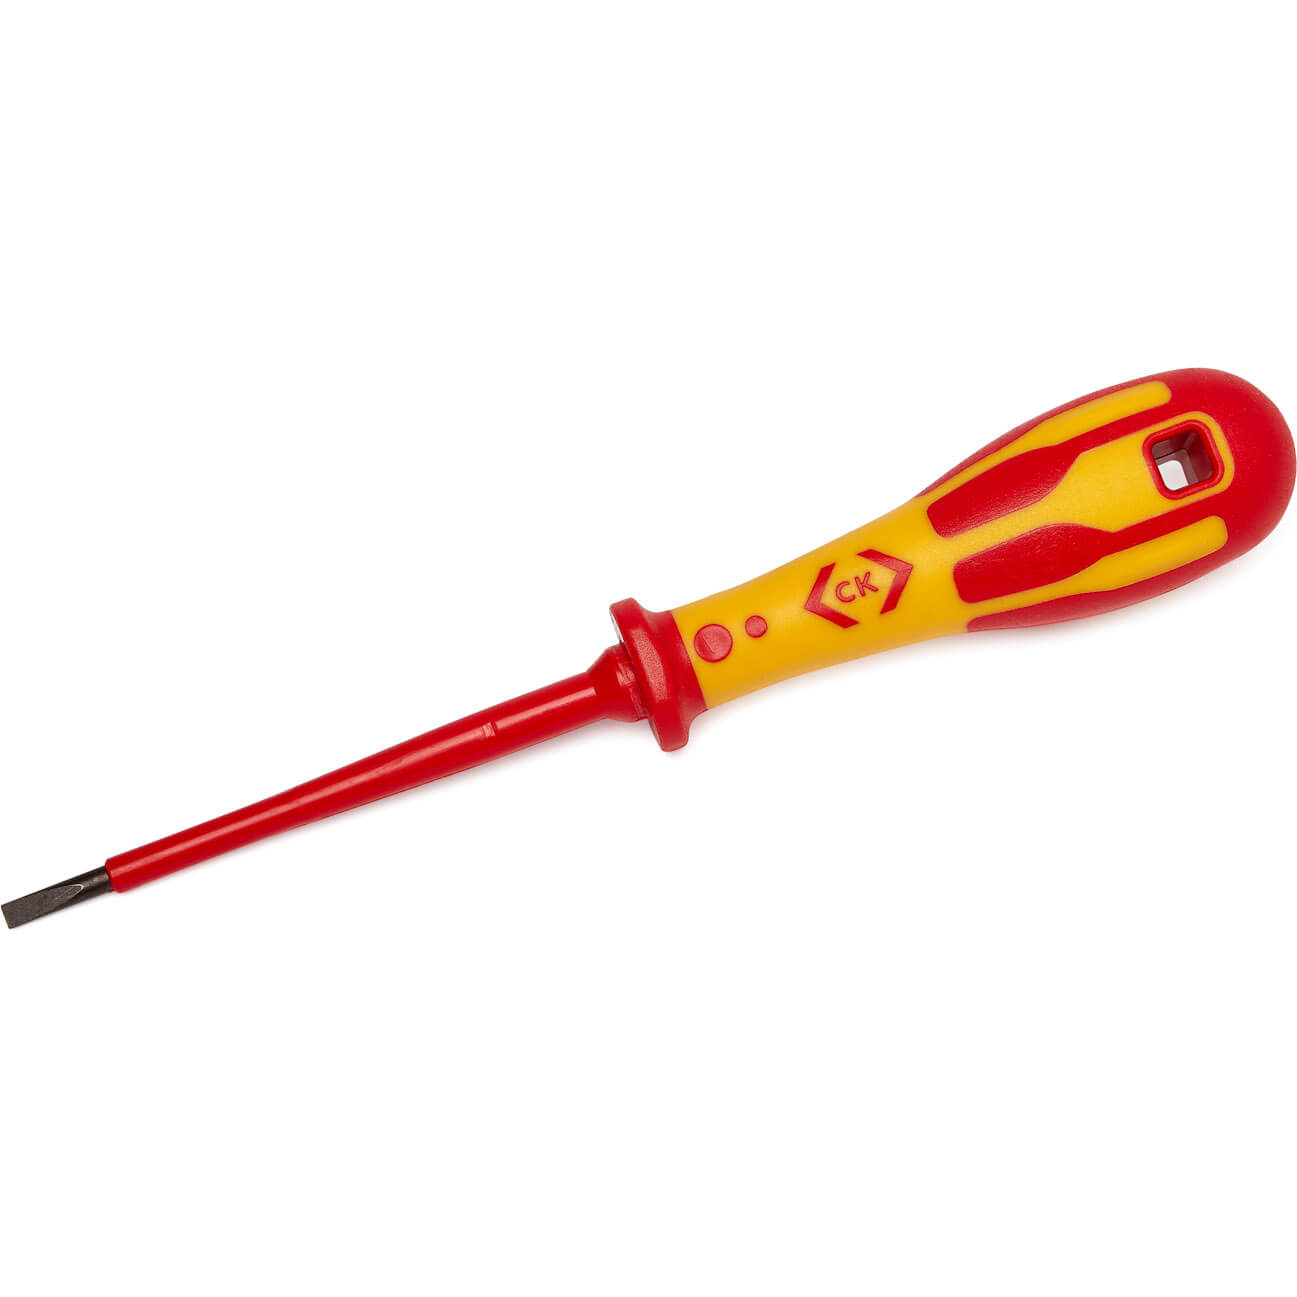 Image of CK Dextro VDE Insulated Parallel Slotted Screwdriver 3mm 100mm